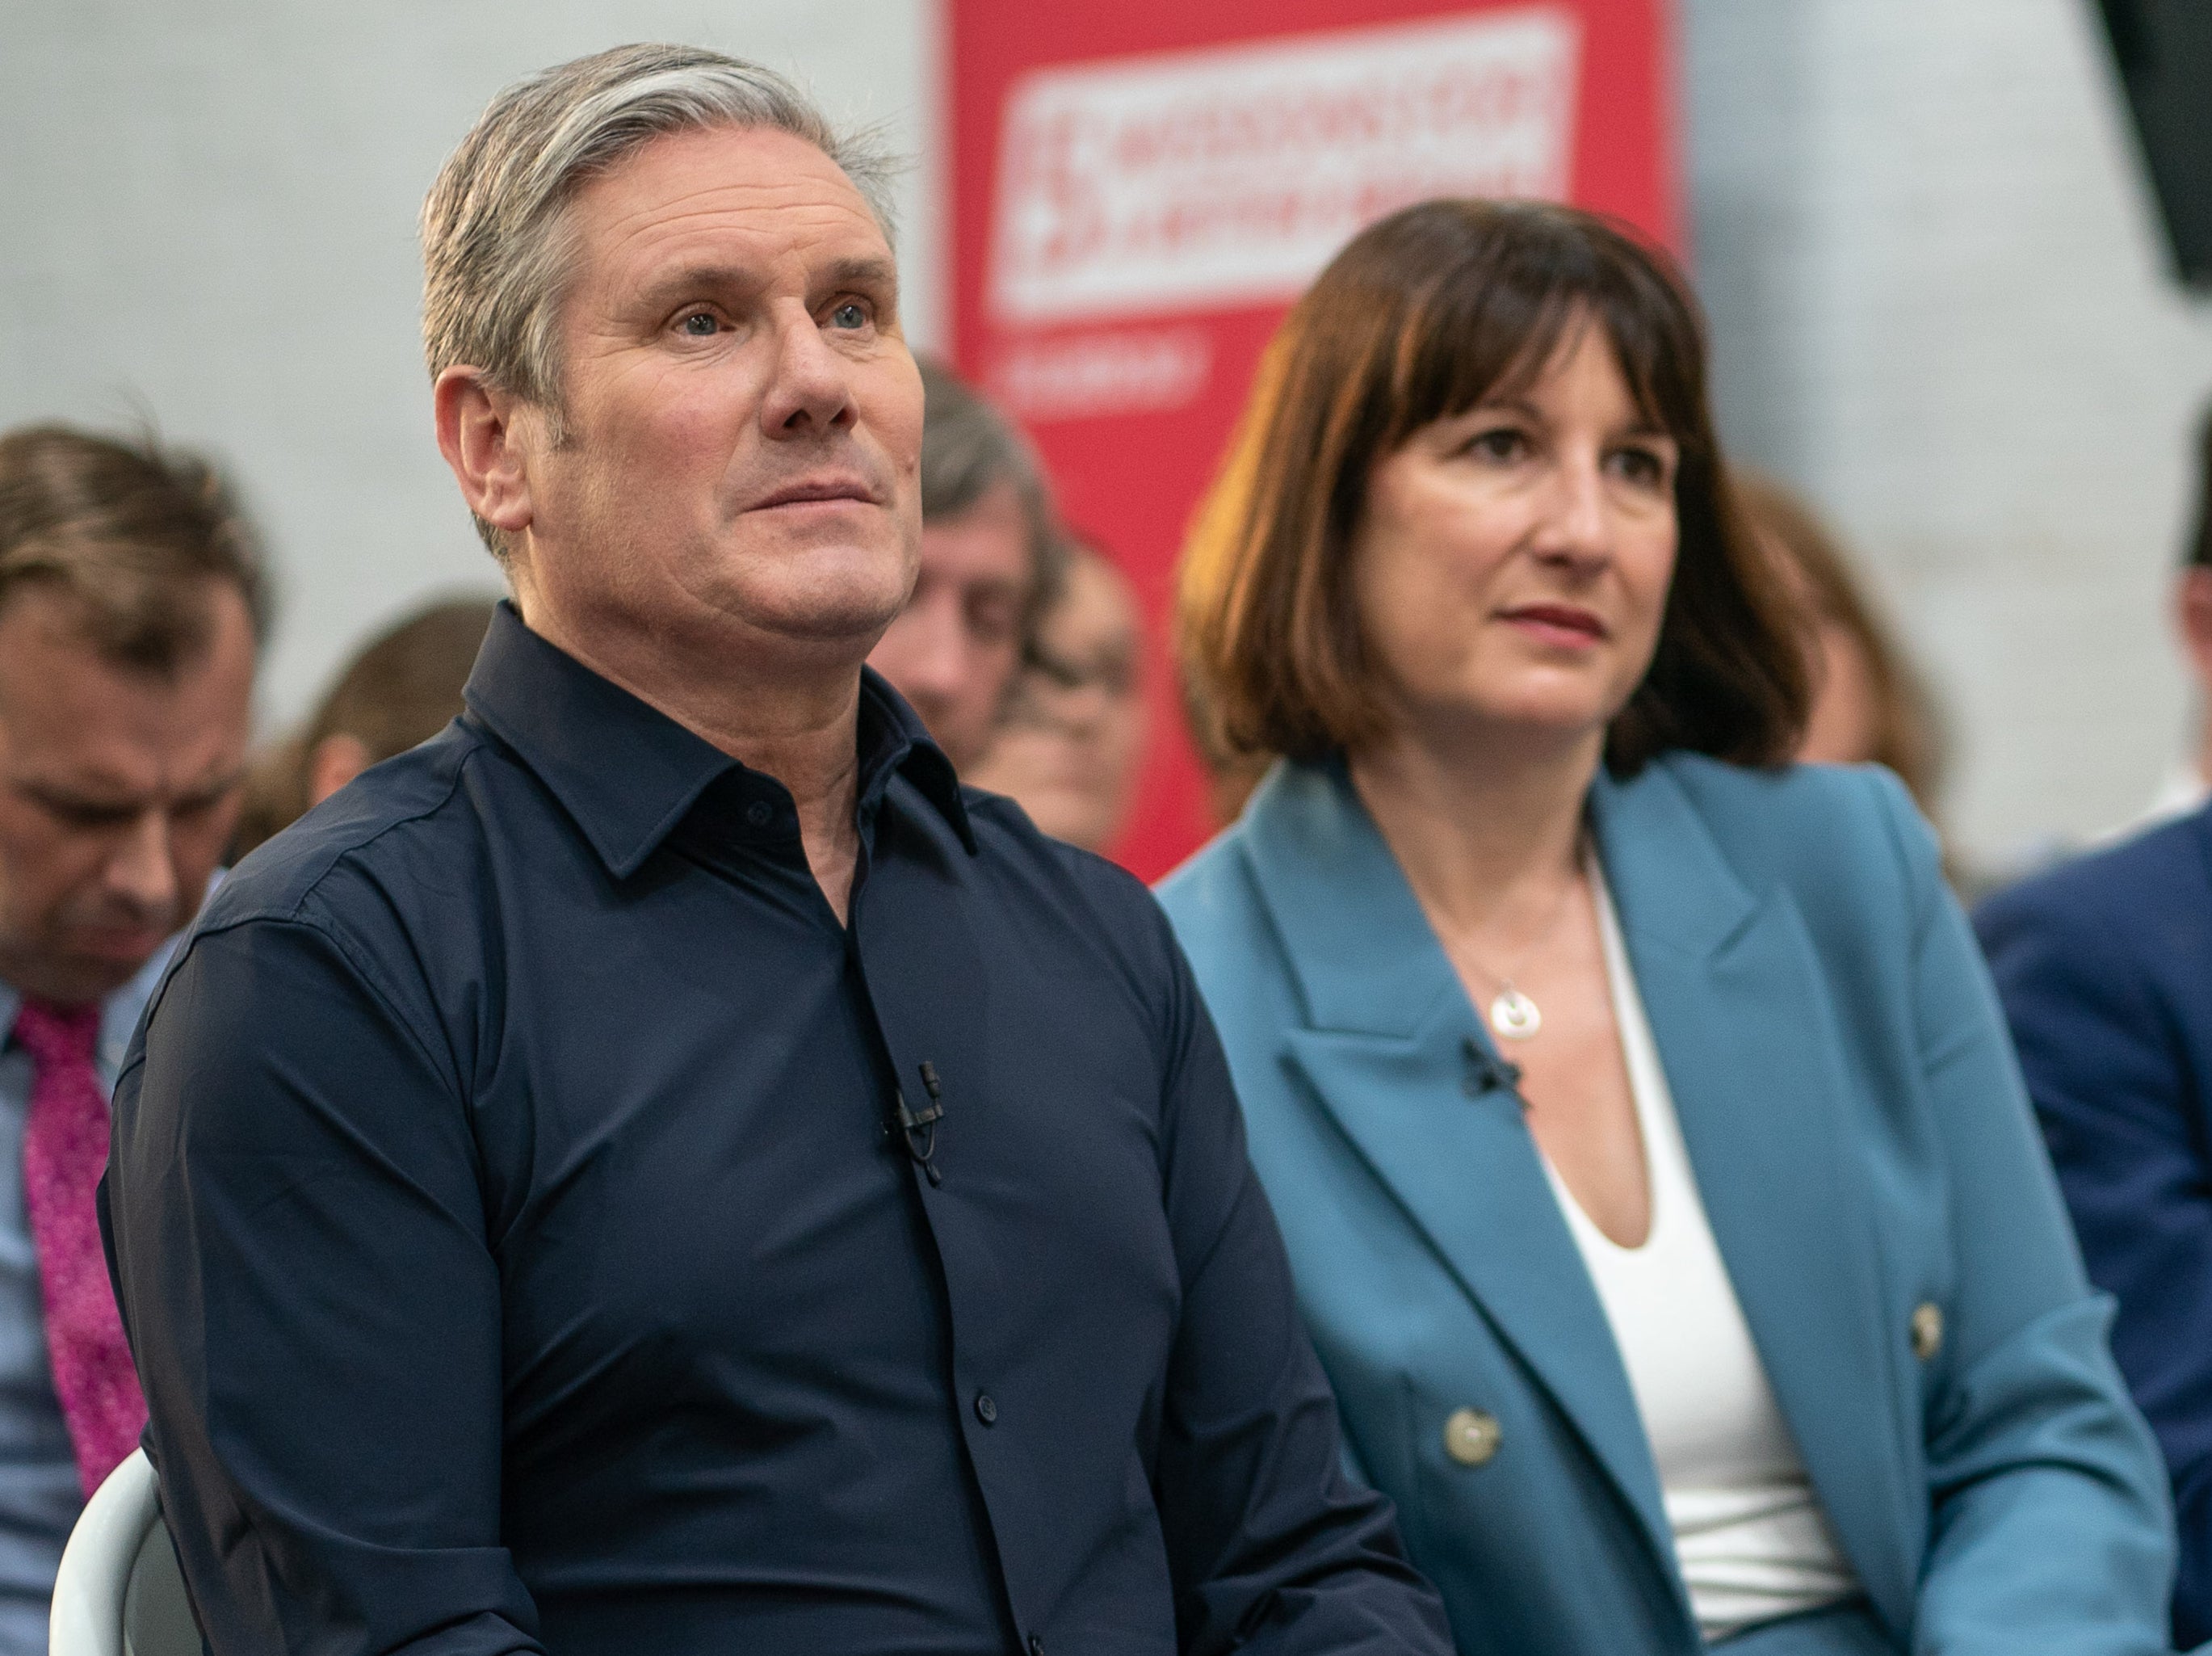 Keir Starmer and Rachel Reeves, the key figures behind Labour’s economic policy